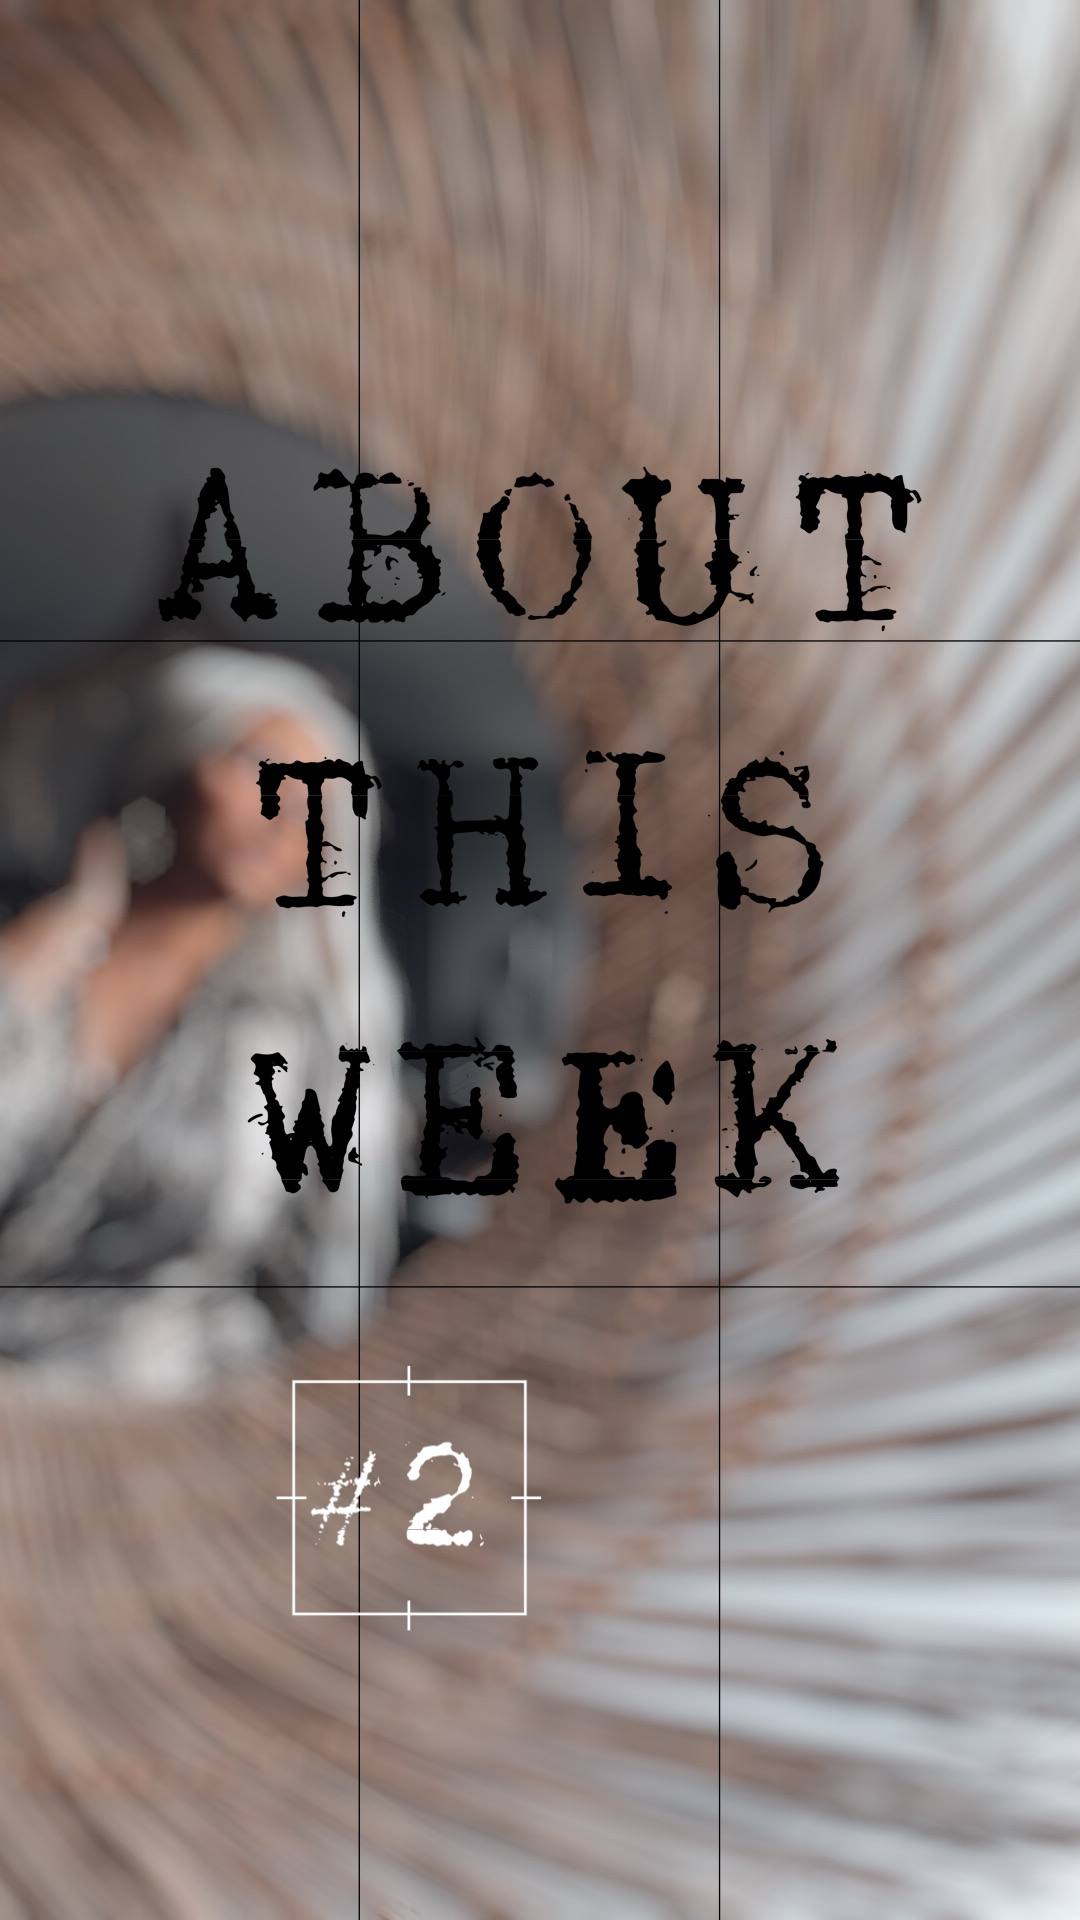 About this week #2